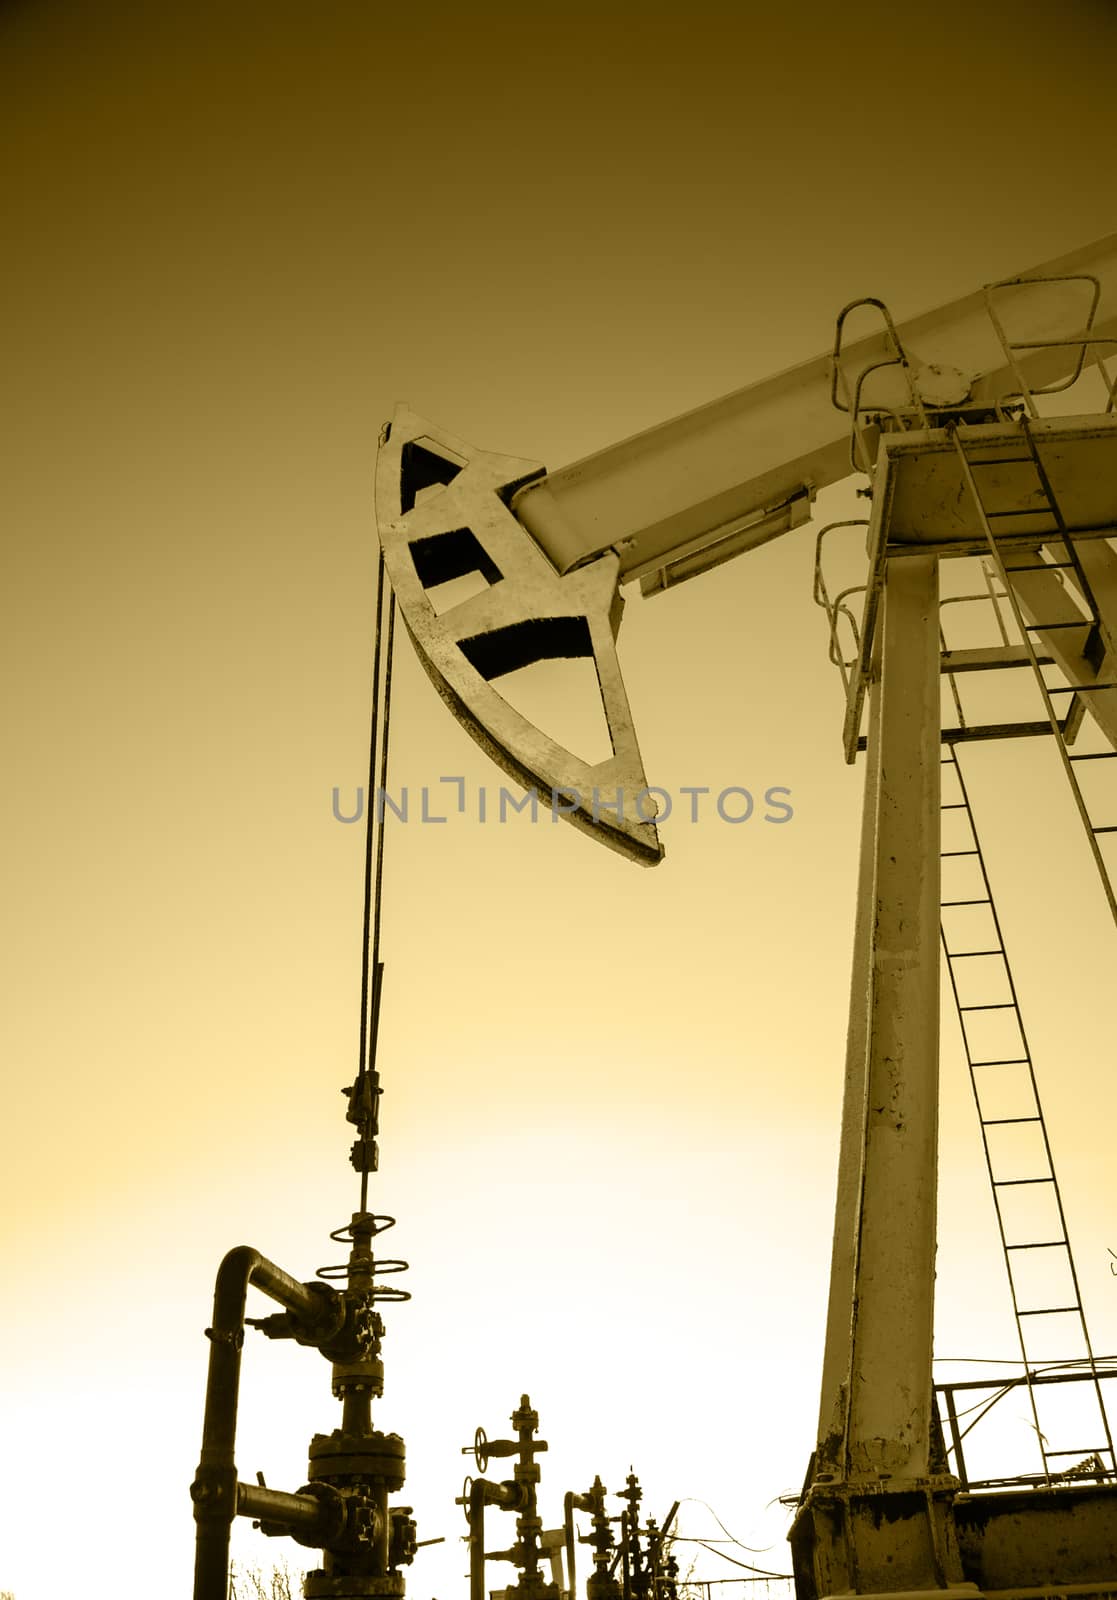 Pump jack and wellheads. Extraction of oil. Toned sepia.